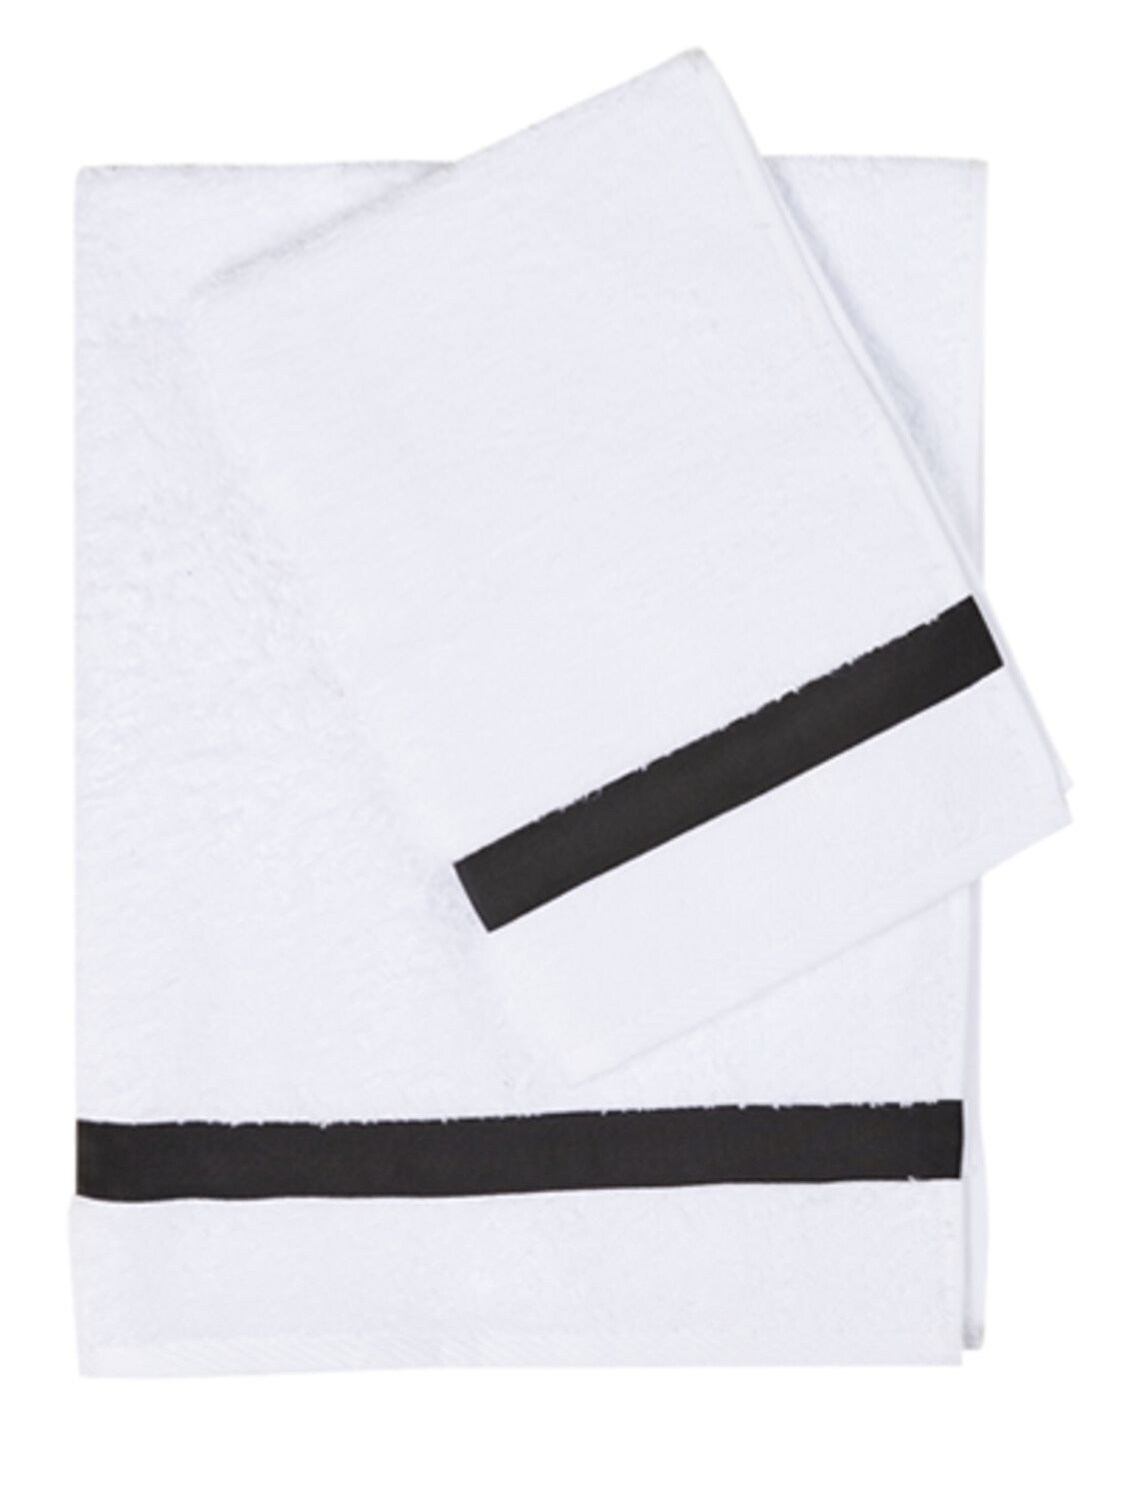 Alessandro Di Marco Set Of 2 Cotton Terrycloth Towels In White,black